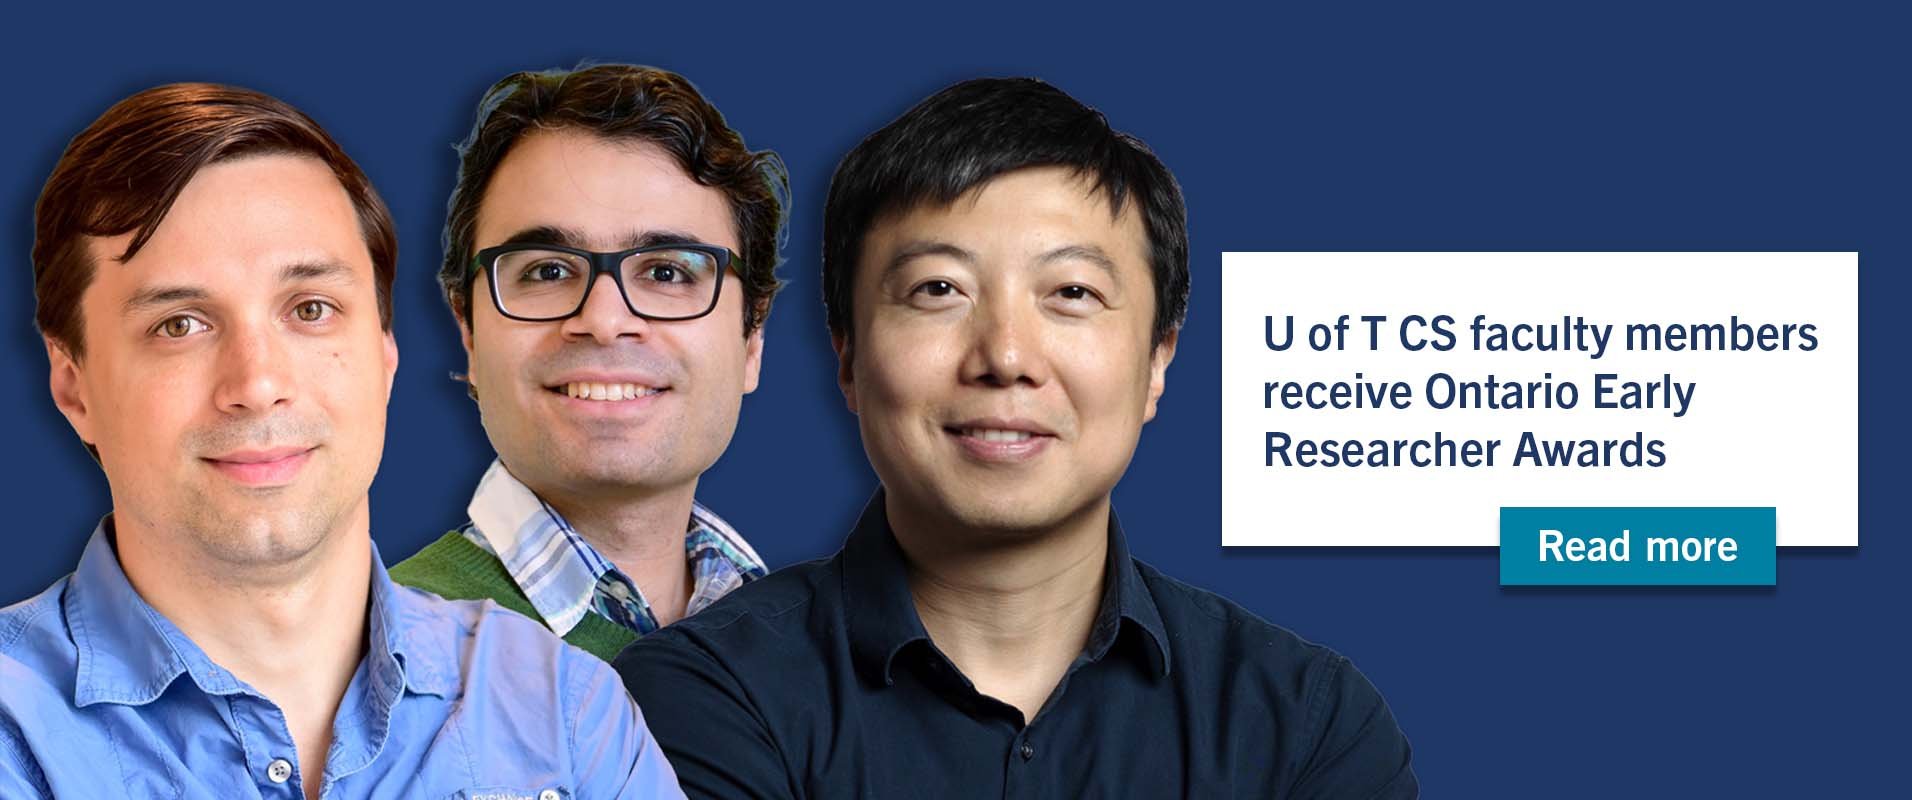 U of T CS faculty members receive Ontario Early Researcher Awards